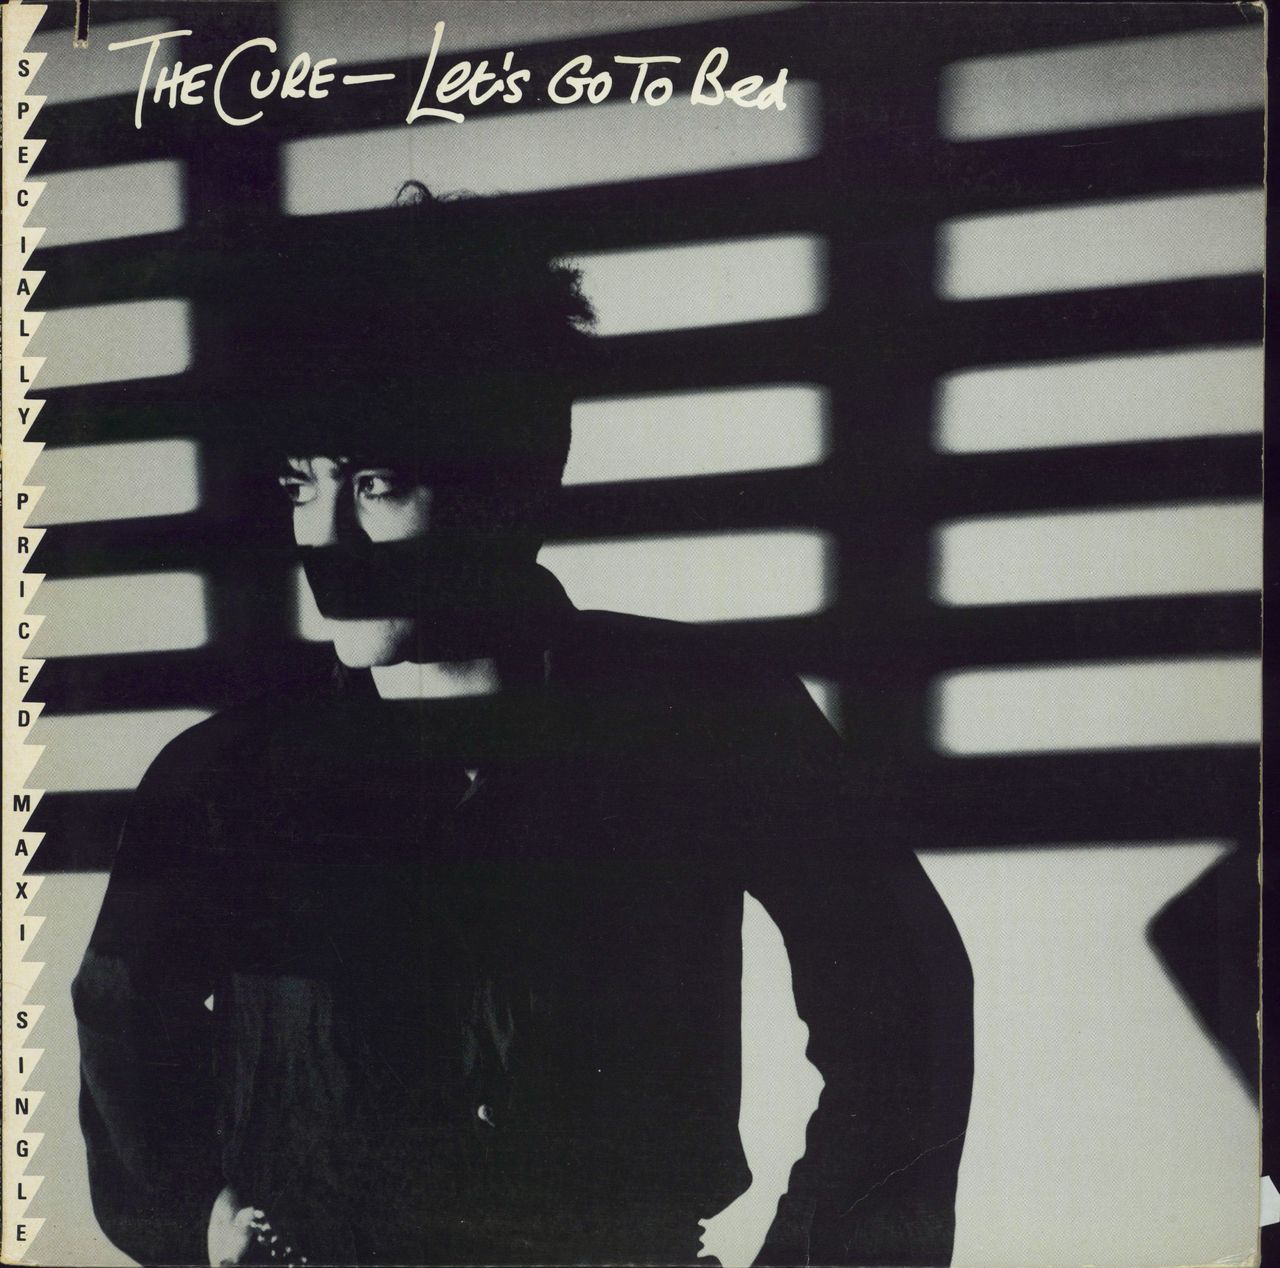 The Cure Let's Go To Bed - EX US 12" vinyl single (12 inch record / Maxi-single) 0-29689